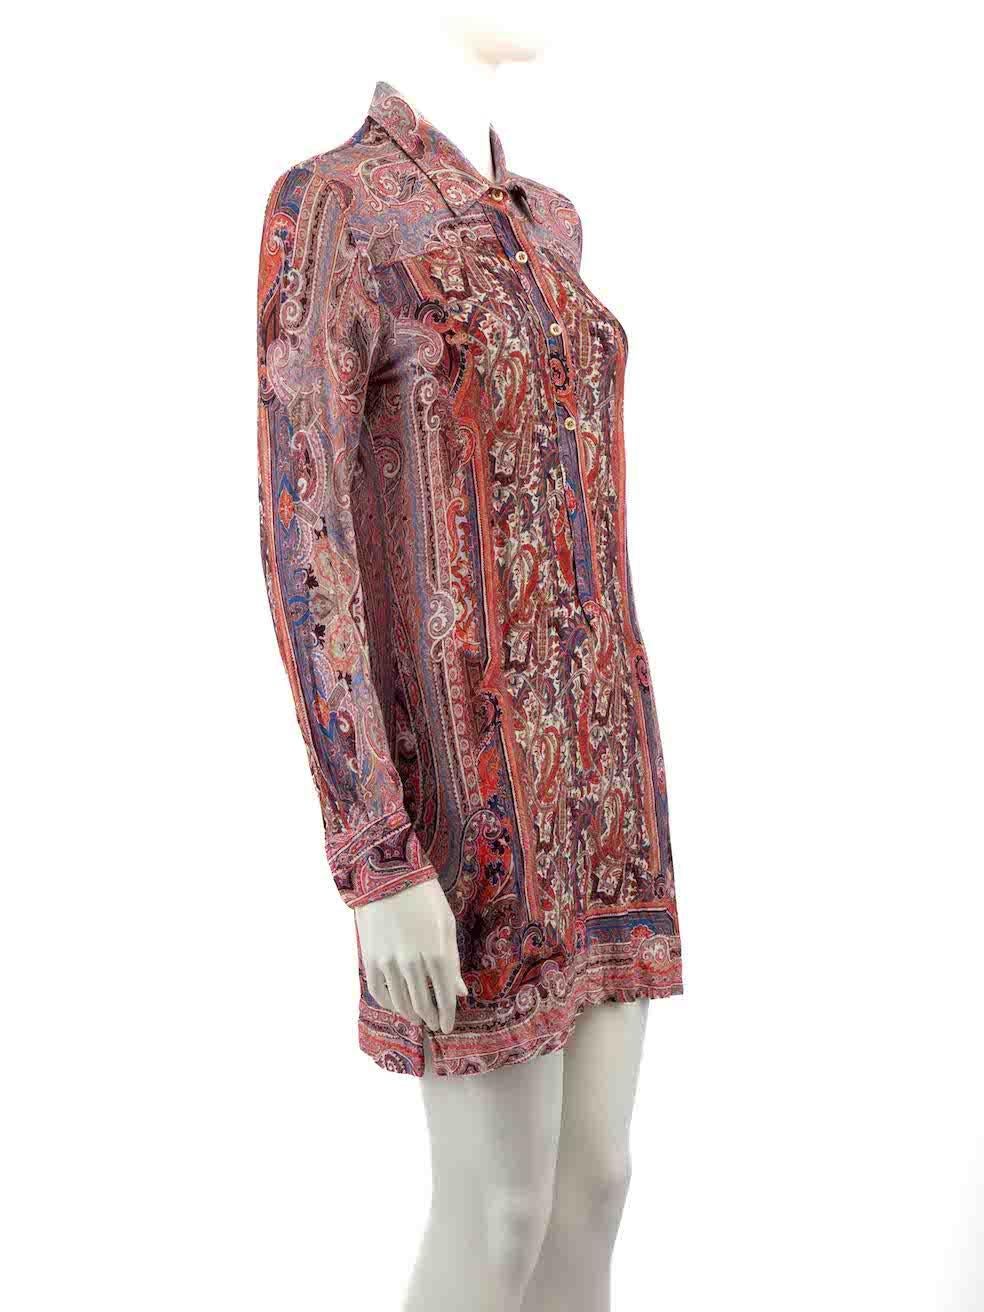 CONDITION is Very good. Minimal wear to dress is evident. Missing button on this used Isabel Marant designer resale item.
 
 
 
 Details
 
 
 Tilda model
 
 Pink
 
 Viscose
 
 Long sleeves dress
 
 Paisley print pattern
 
 Stretchy
 
 Front button